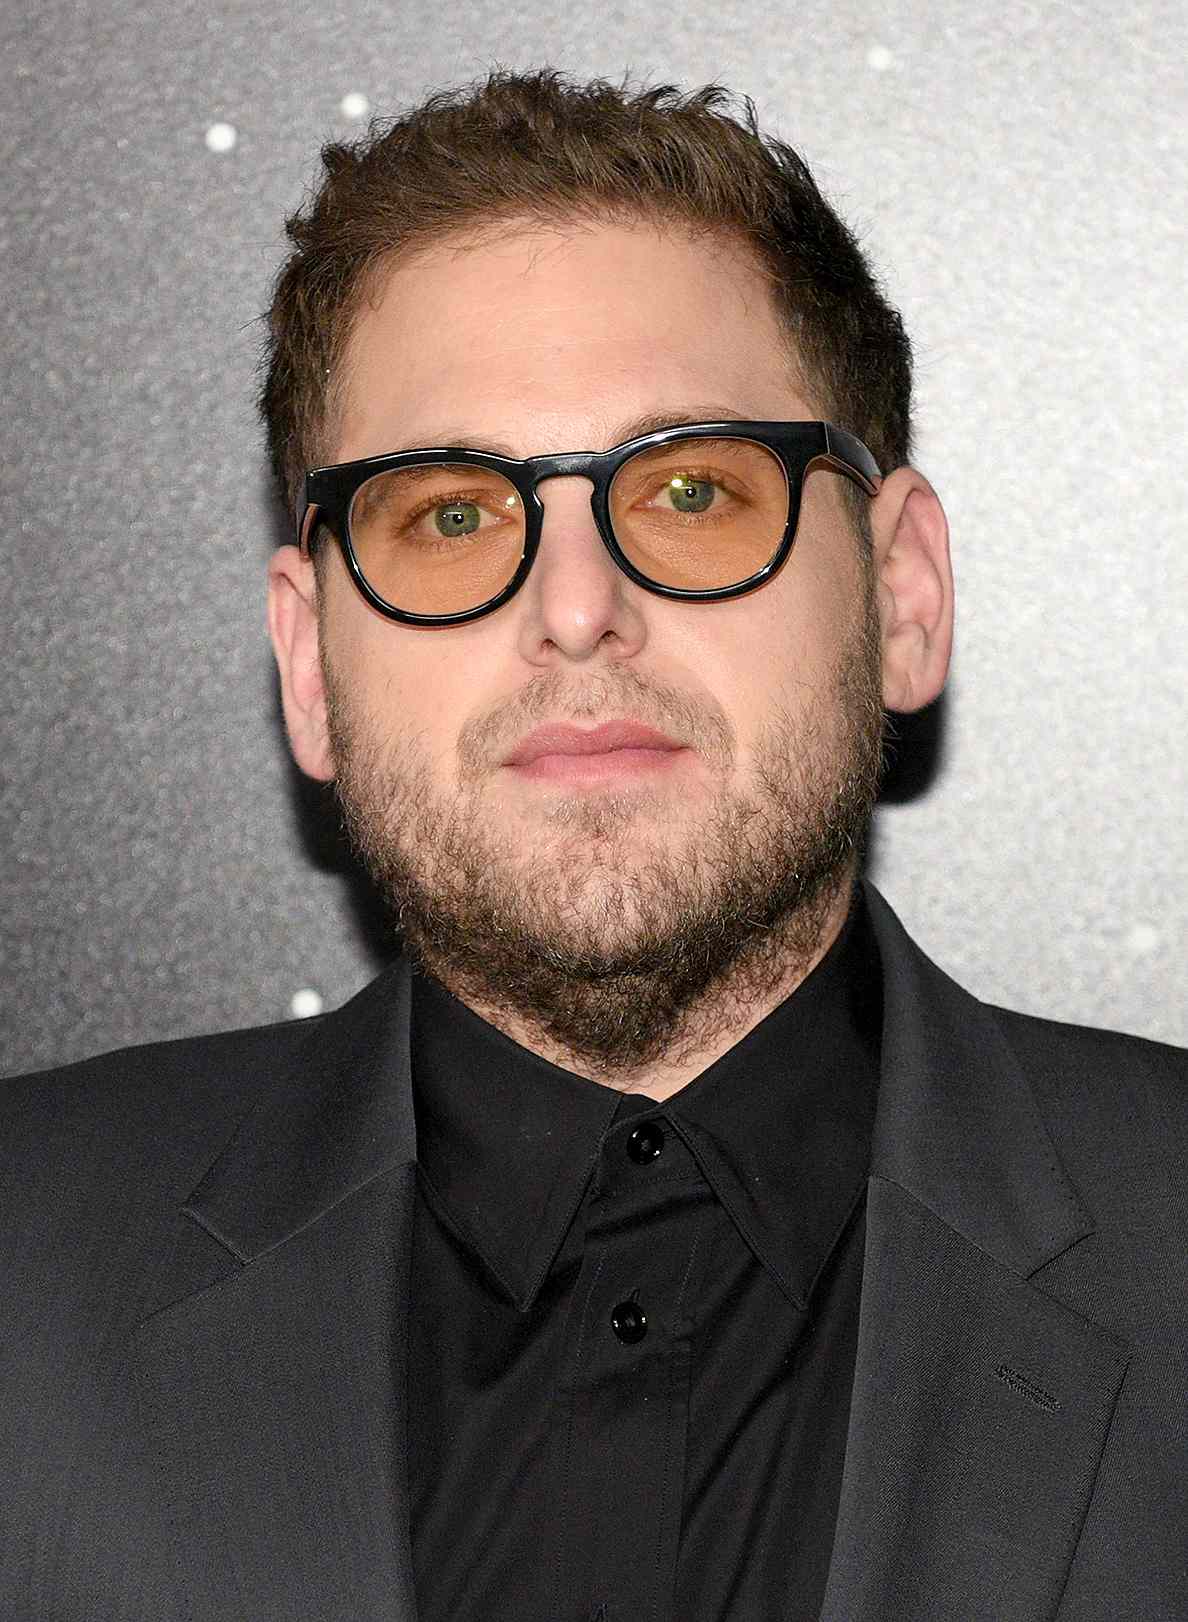 NEW YORK, NY - NOVEMBER 19: Jonah Hill attends The Museum Of Modern Art Film Benefit Presented By CHANEL: A Tribute To Martin Scorsese on November 19, 2018